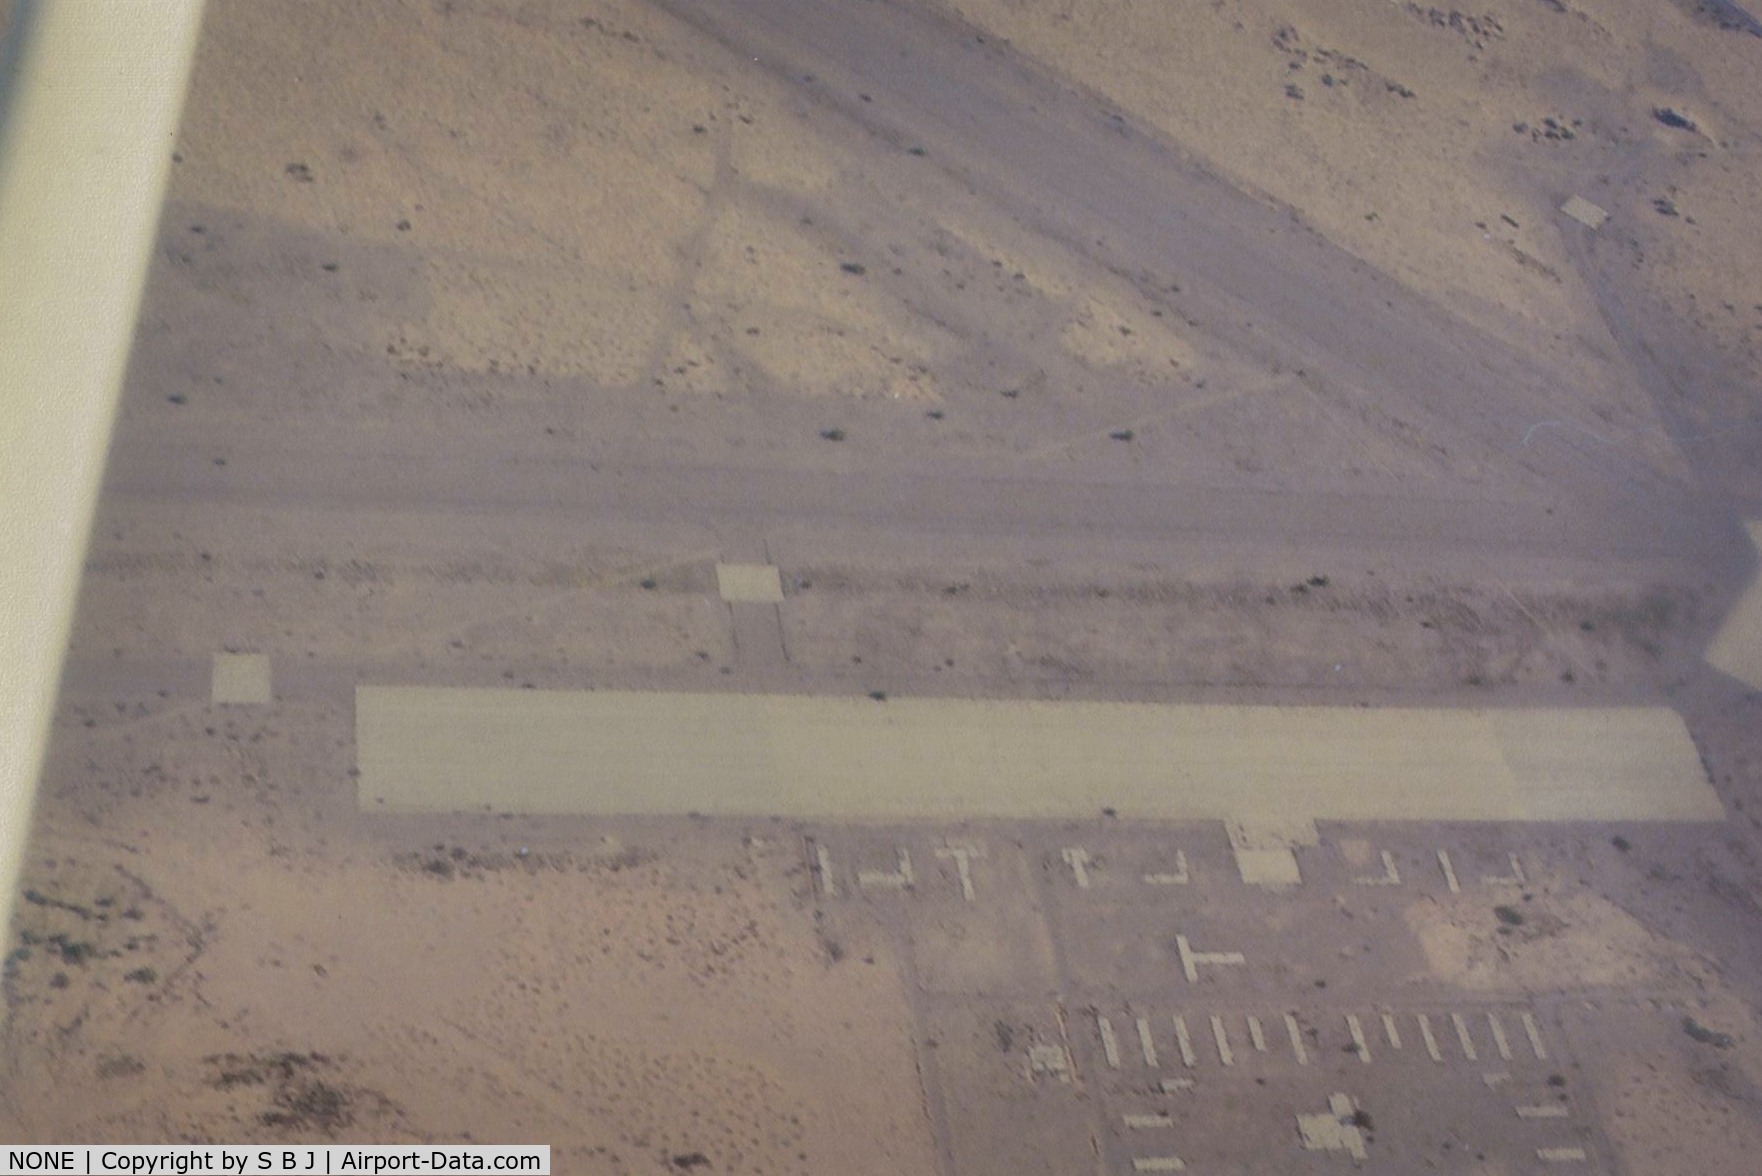 NONE Airport - Former military field on the Hy 8 corridor between Yuma to Phoenix,Az.It is one of many and have yet to determine which one it is.